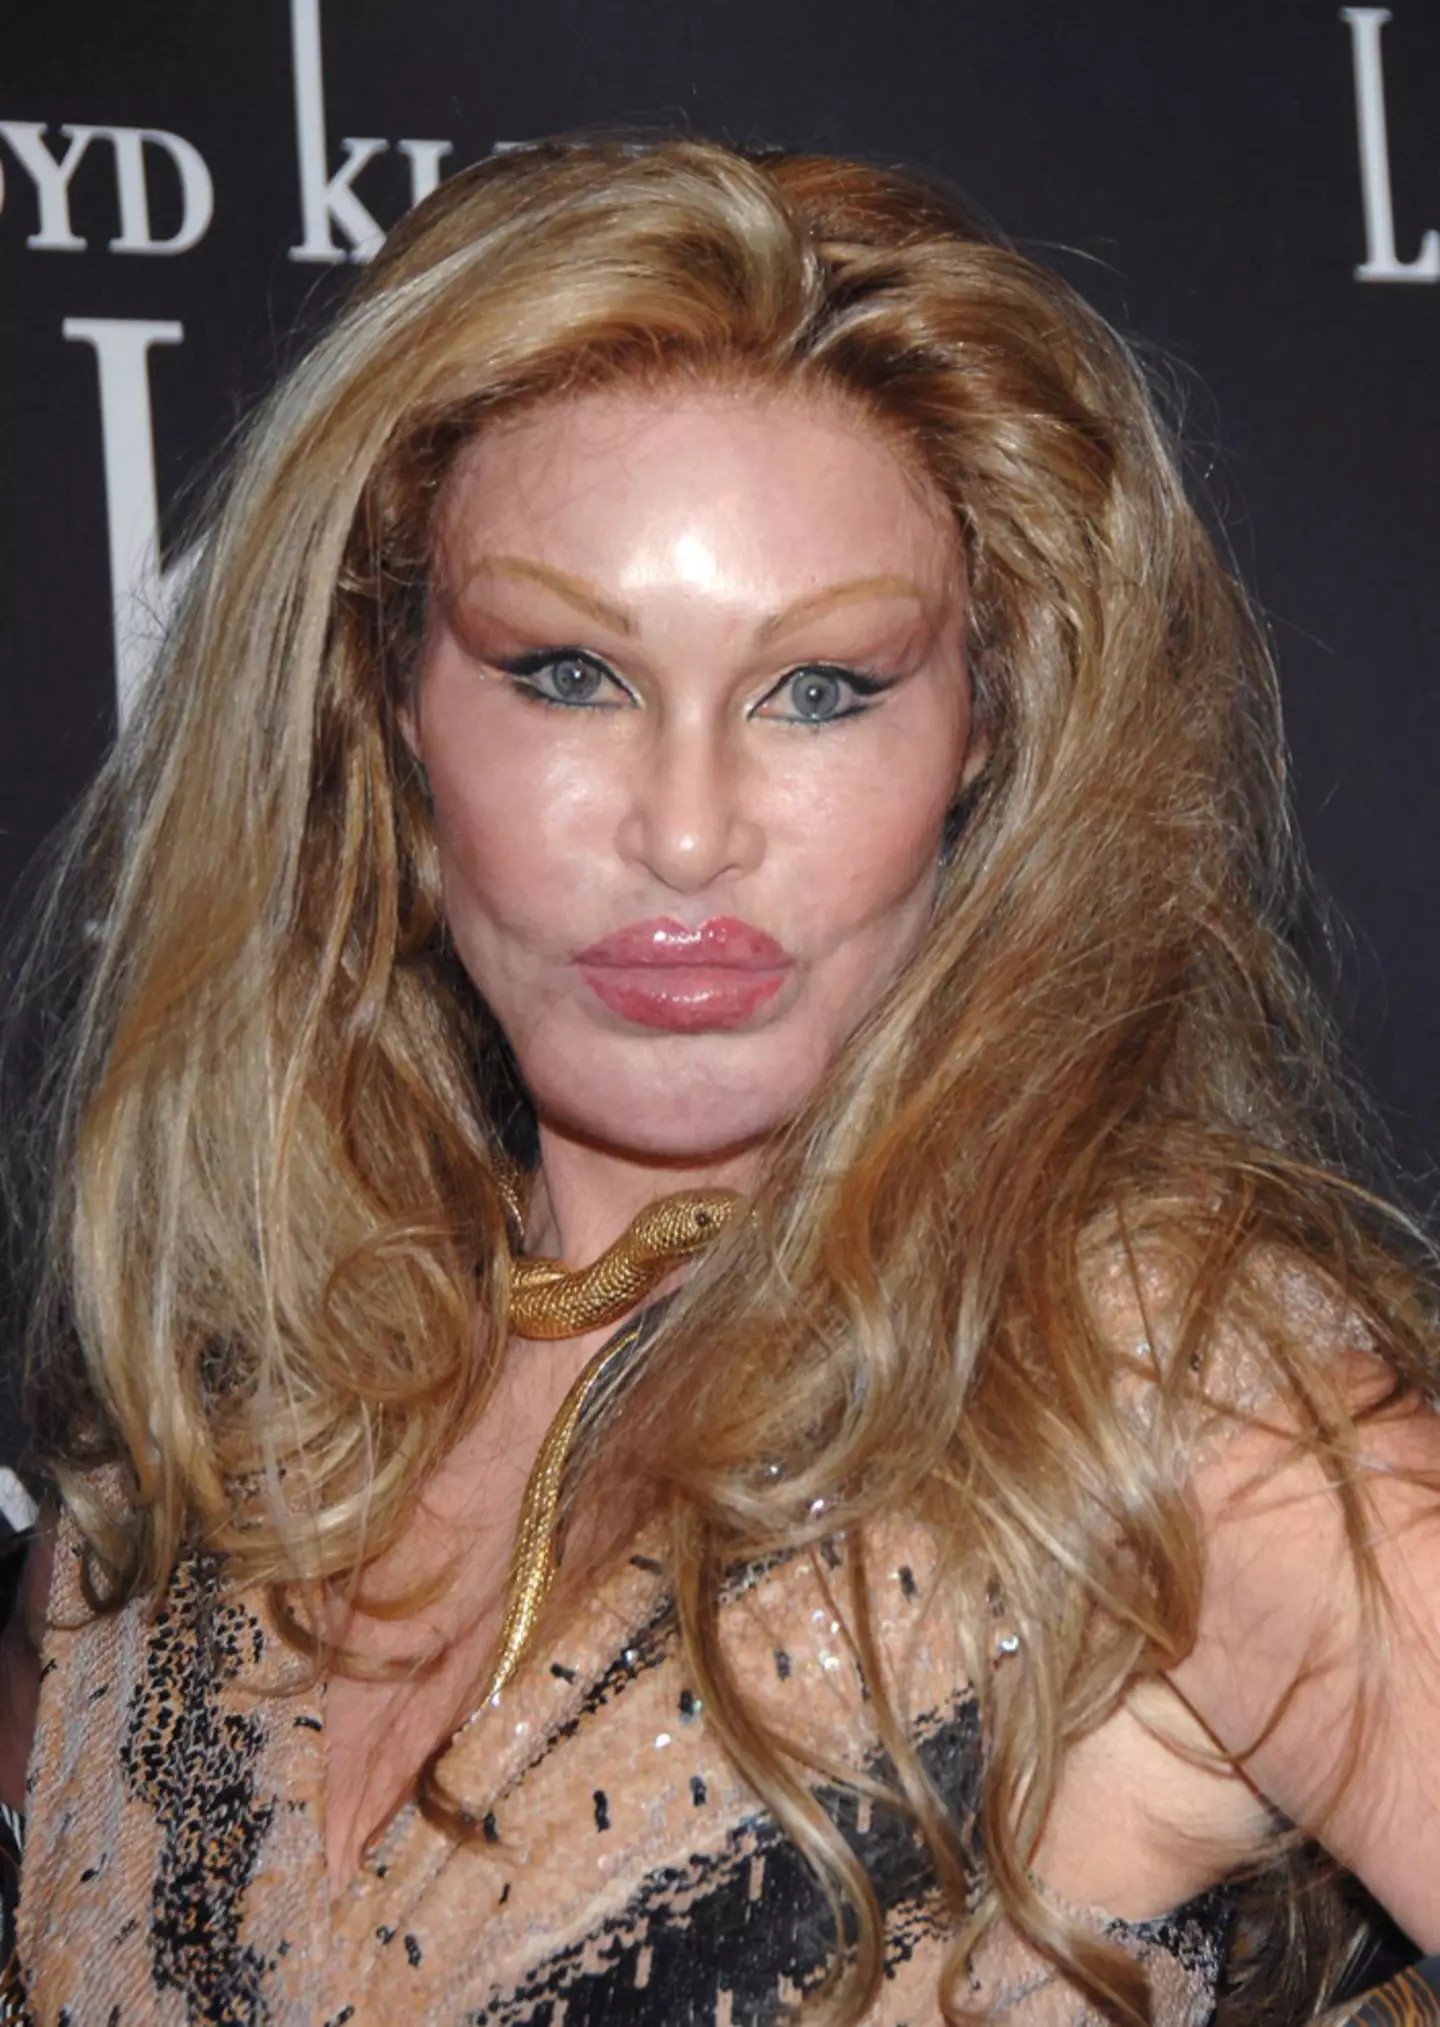 Many have asked whether Jocelyn Wildenstein has had cosmetic surgery.